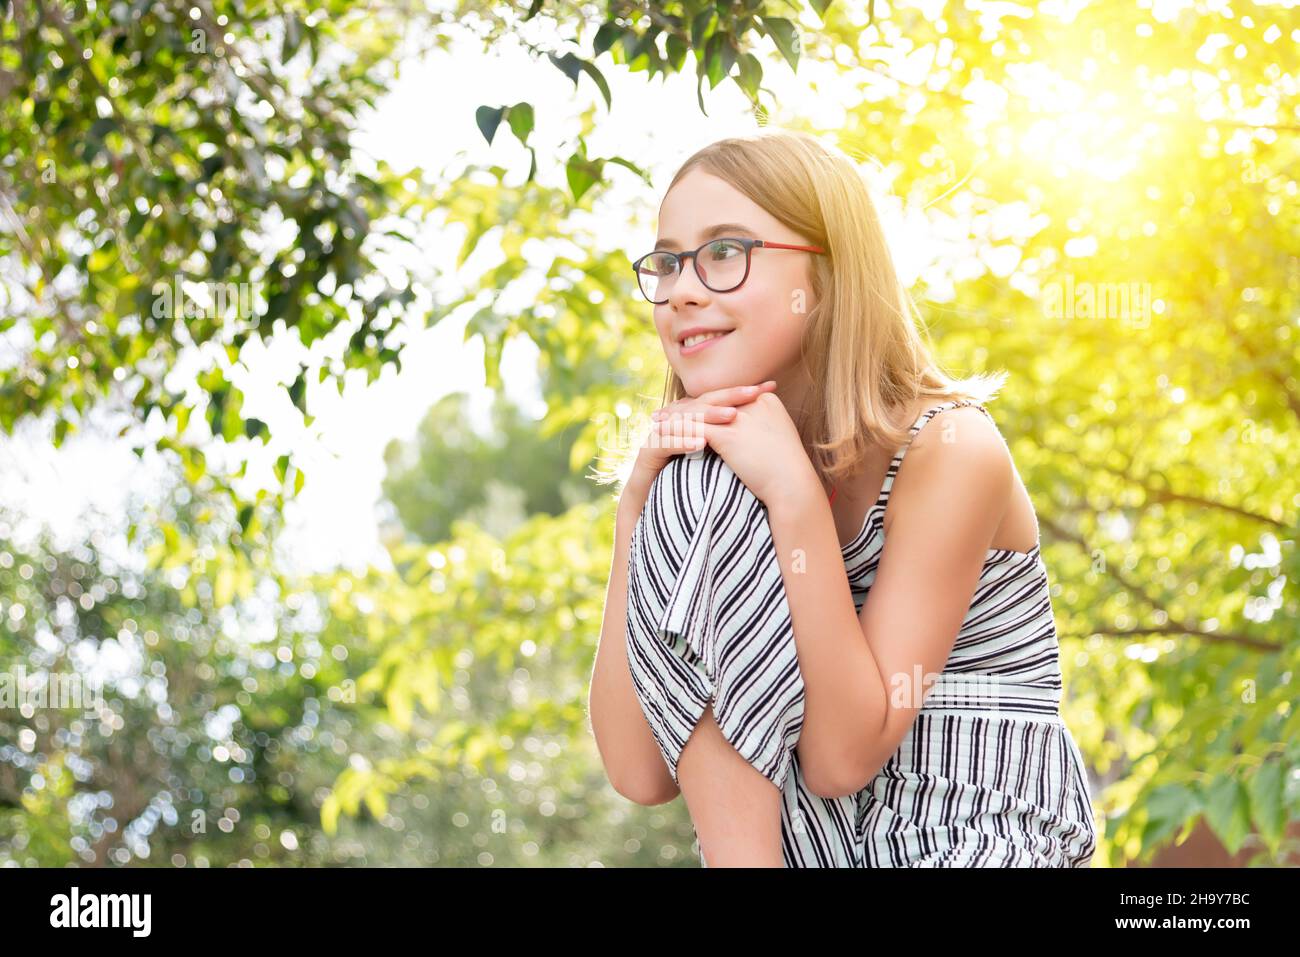 Portrait of a smiling girl with glasses looking to the side with her arms crossed over her knee on a sunny wooded background Stock Photo